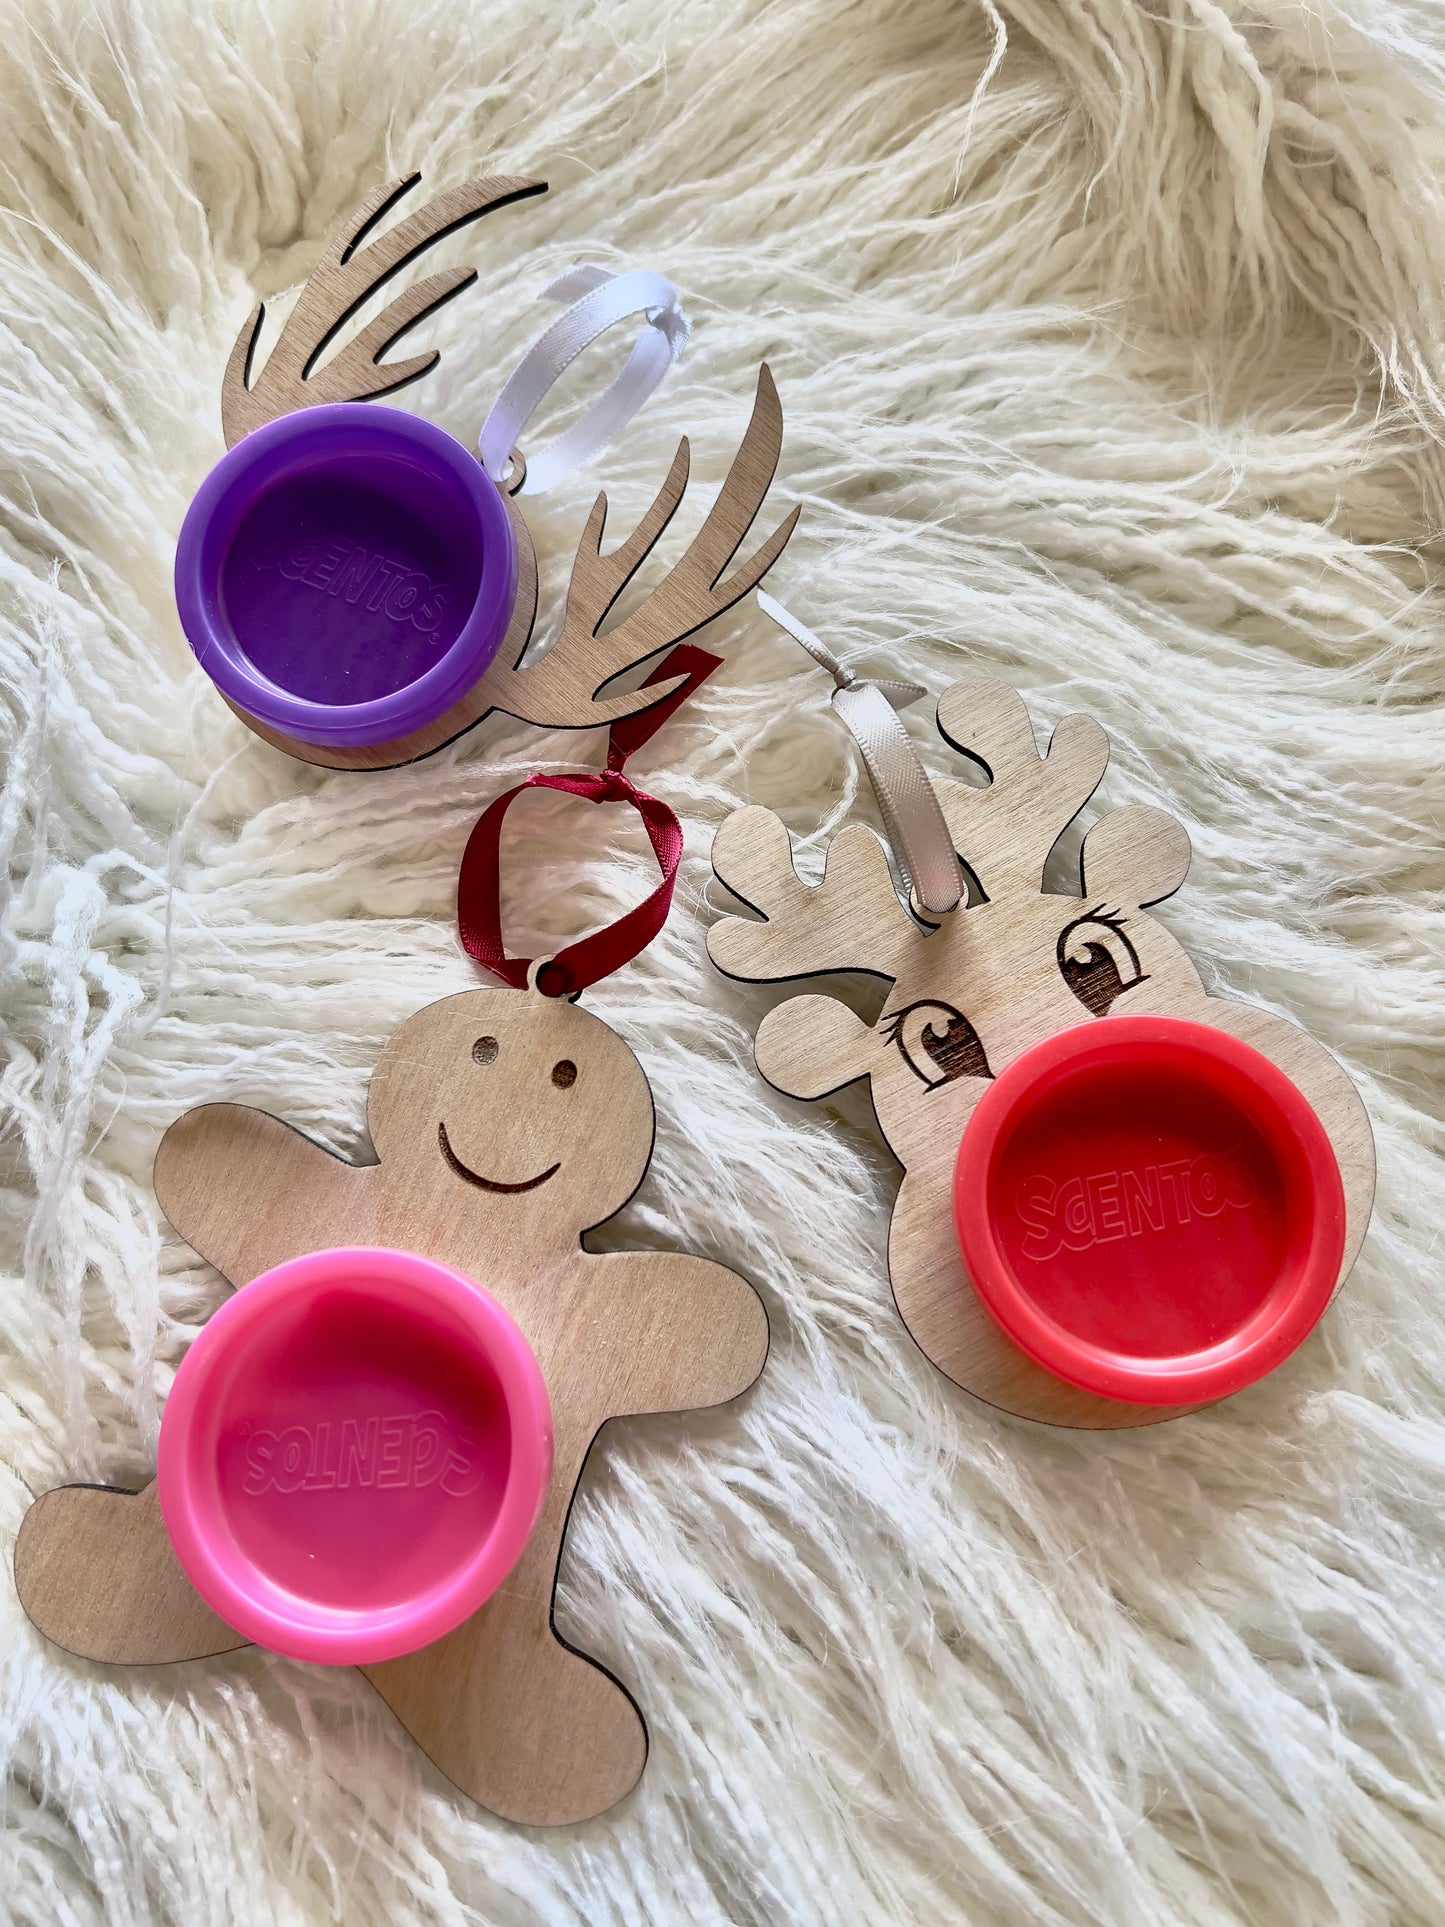 Wooden Christmas Ornament with Scented play dough